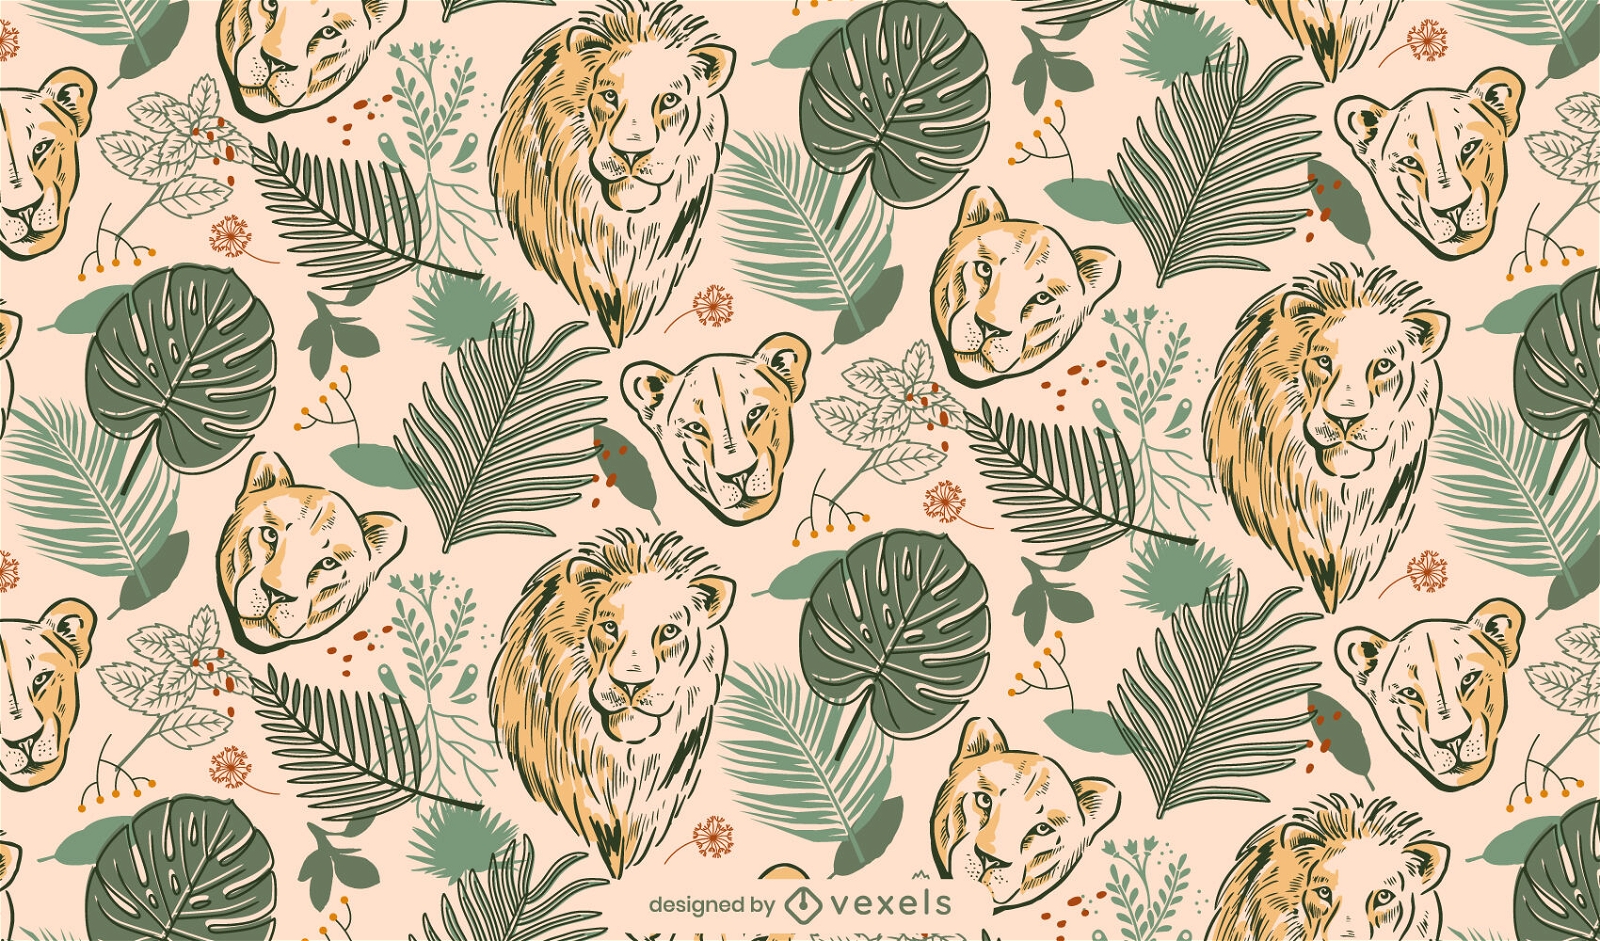 Lions and tigers animals pattern design